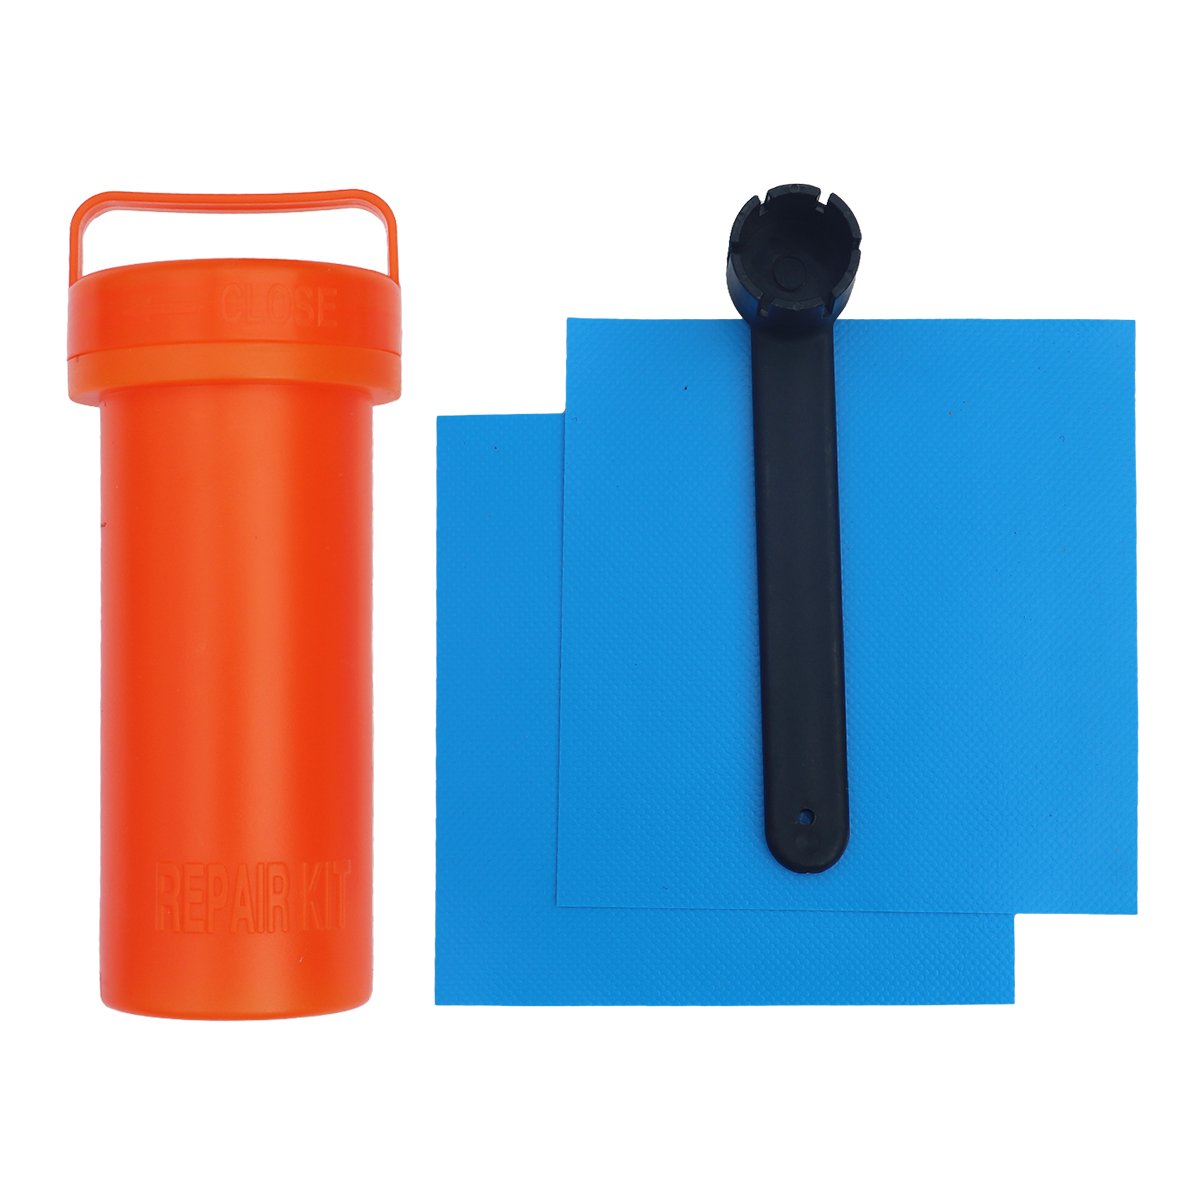 Kahuna Hana Repair Kit for Stand Up Paddle Boards 2